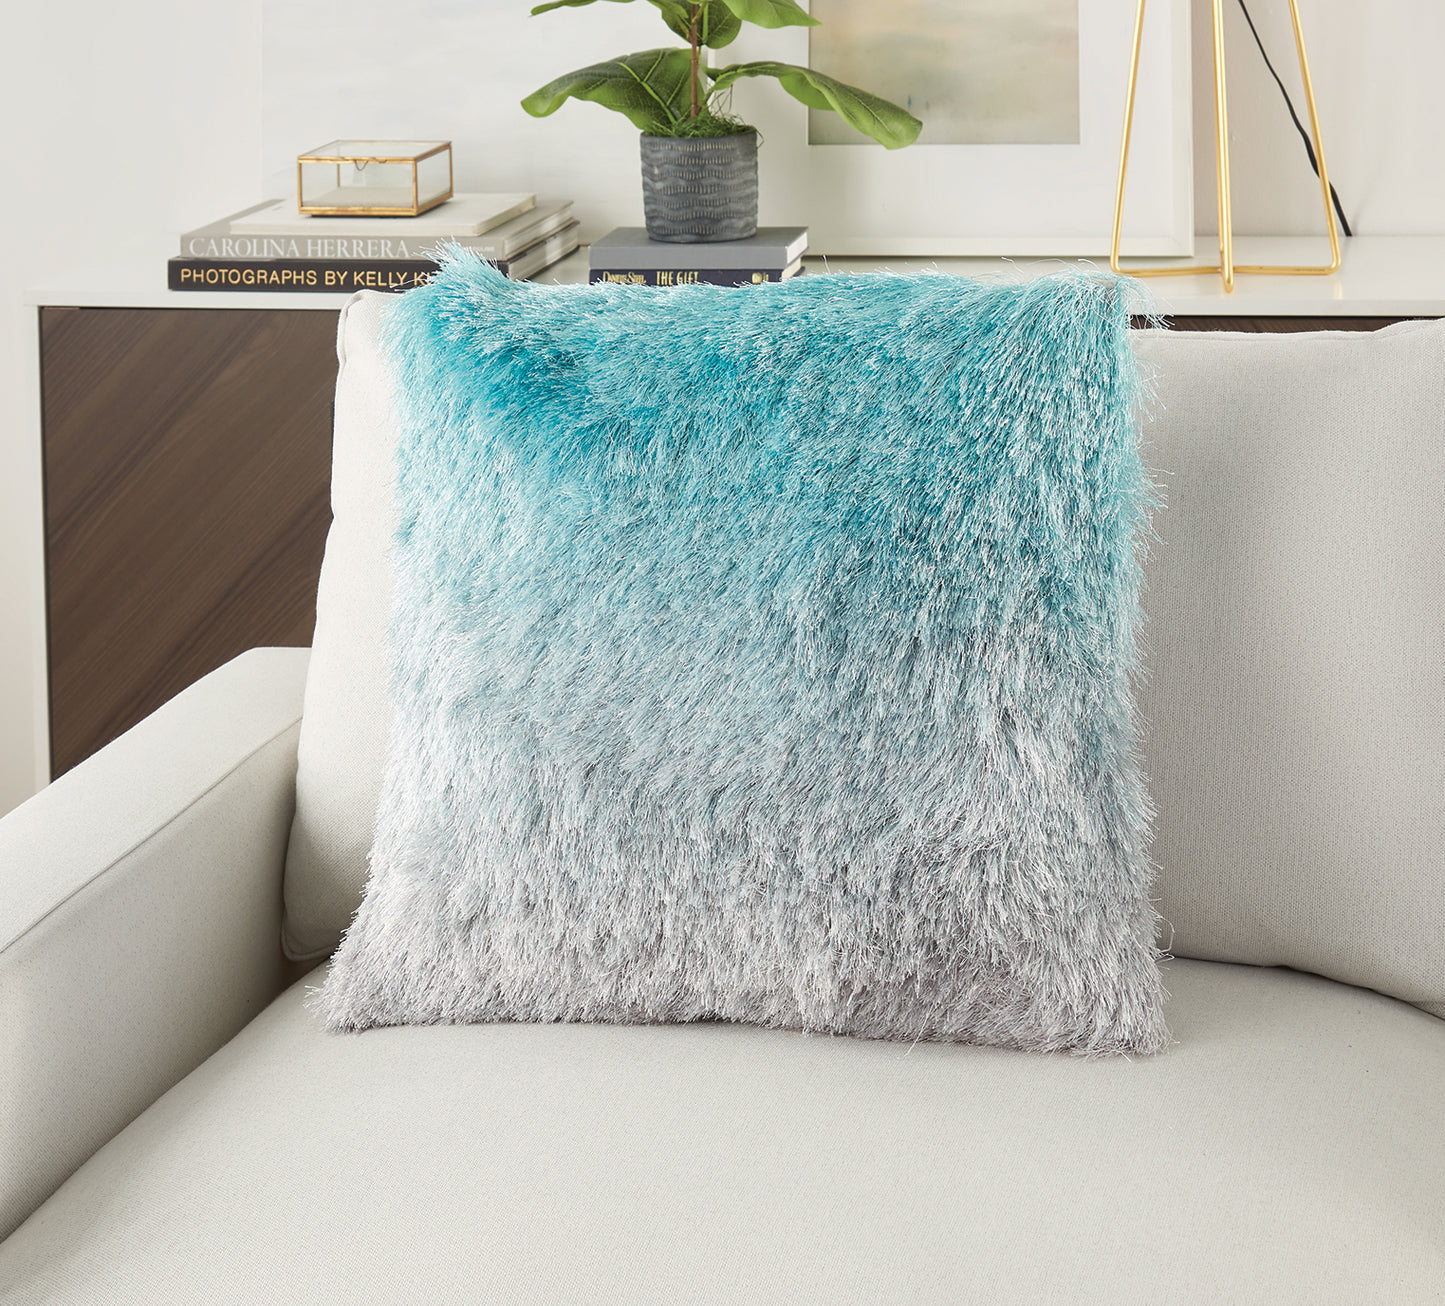 Teal and Silver Pillow